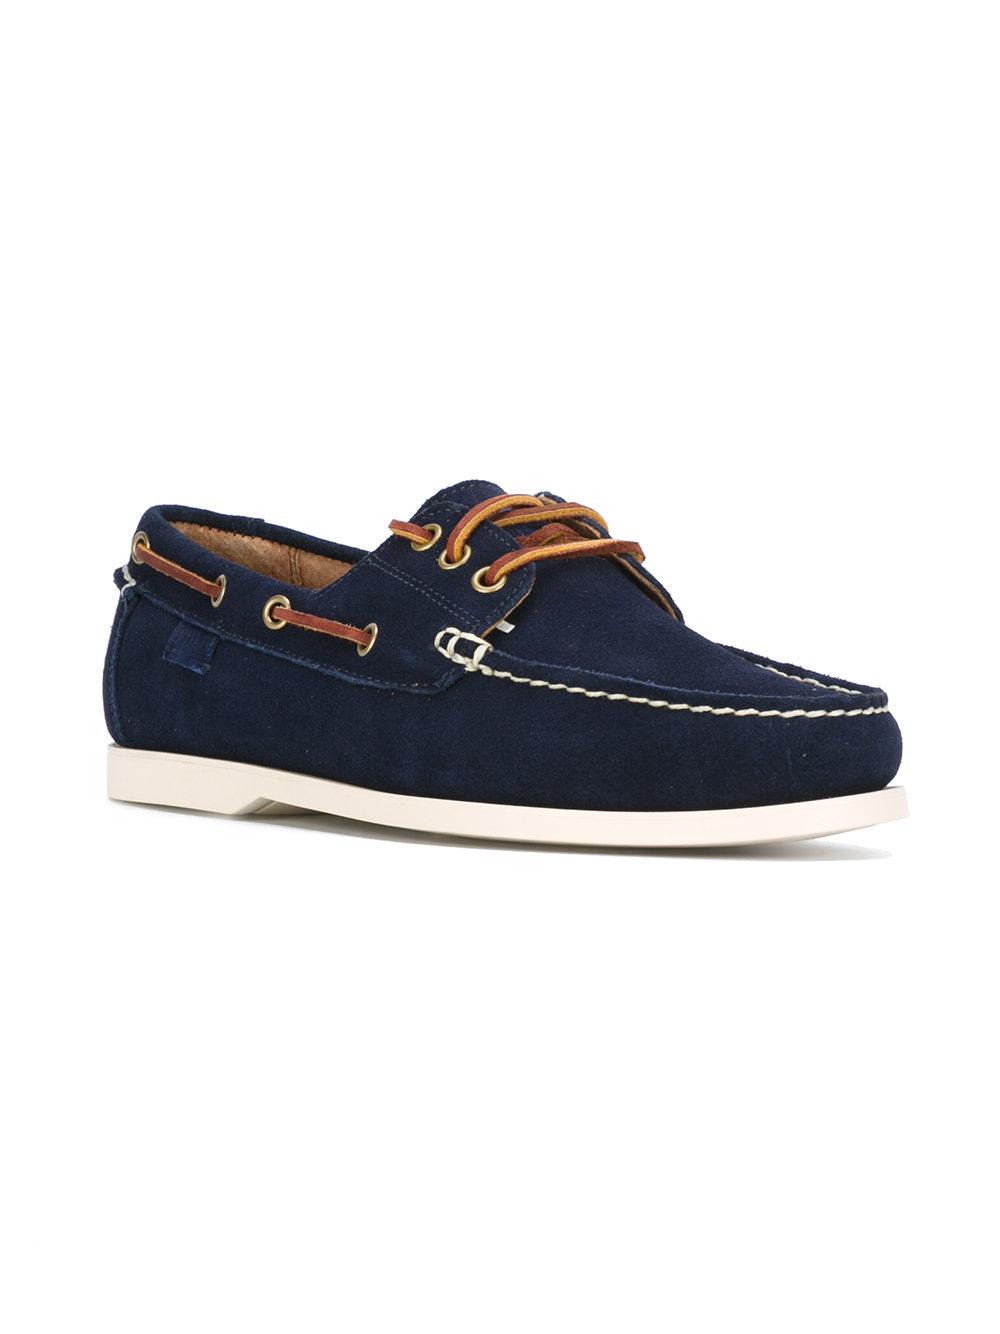 Lyst - Polo Ralph Lauren Classic Boat Shoes in Blue for Men